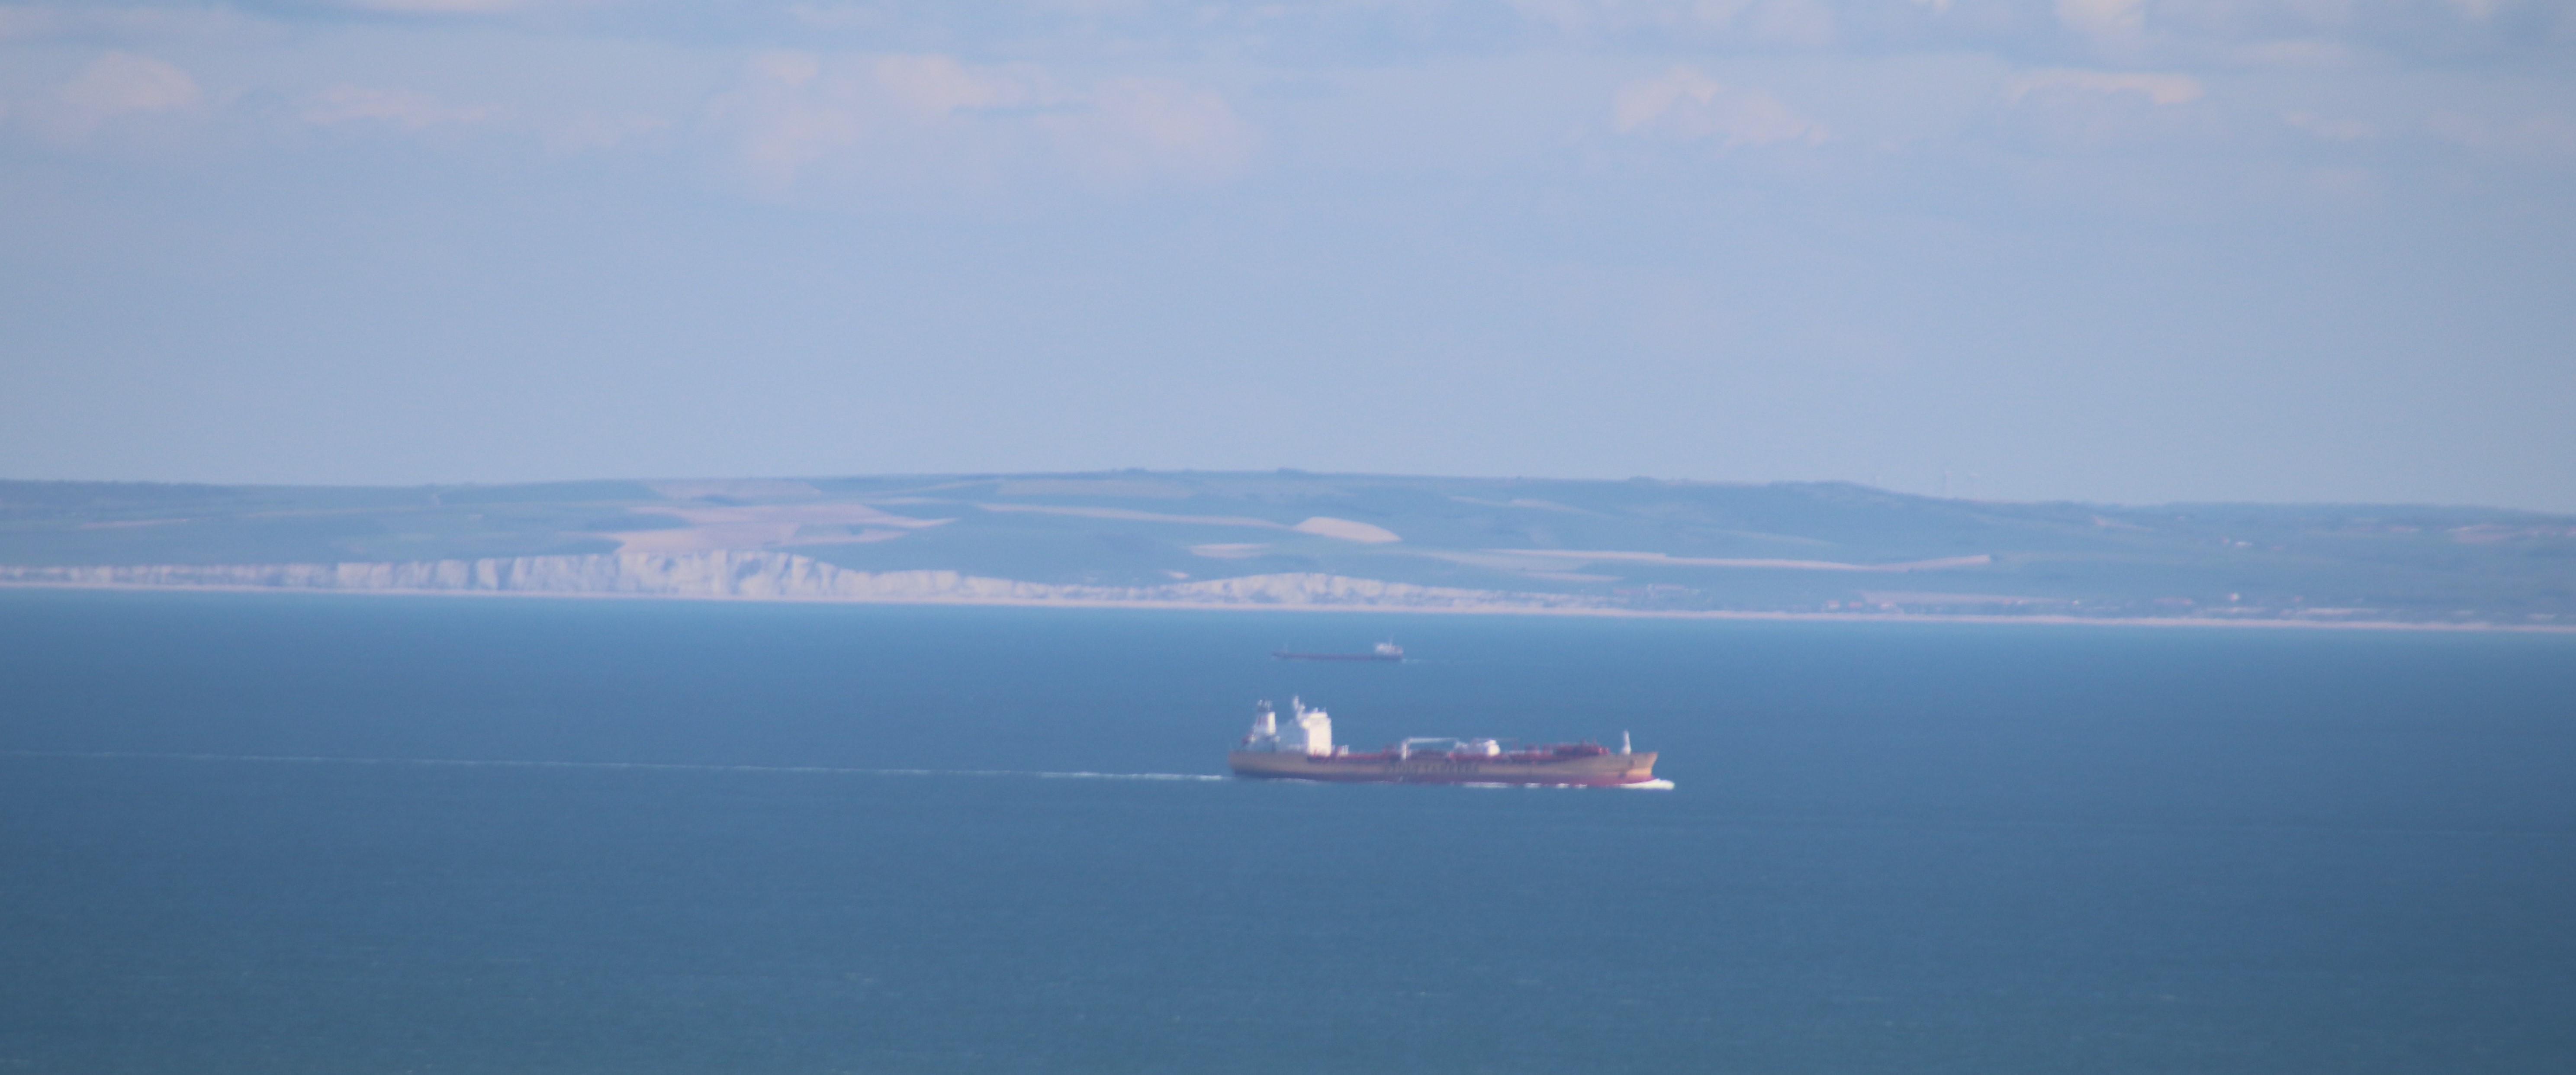 France across one of the worlds busiest shipping lane